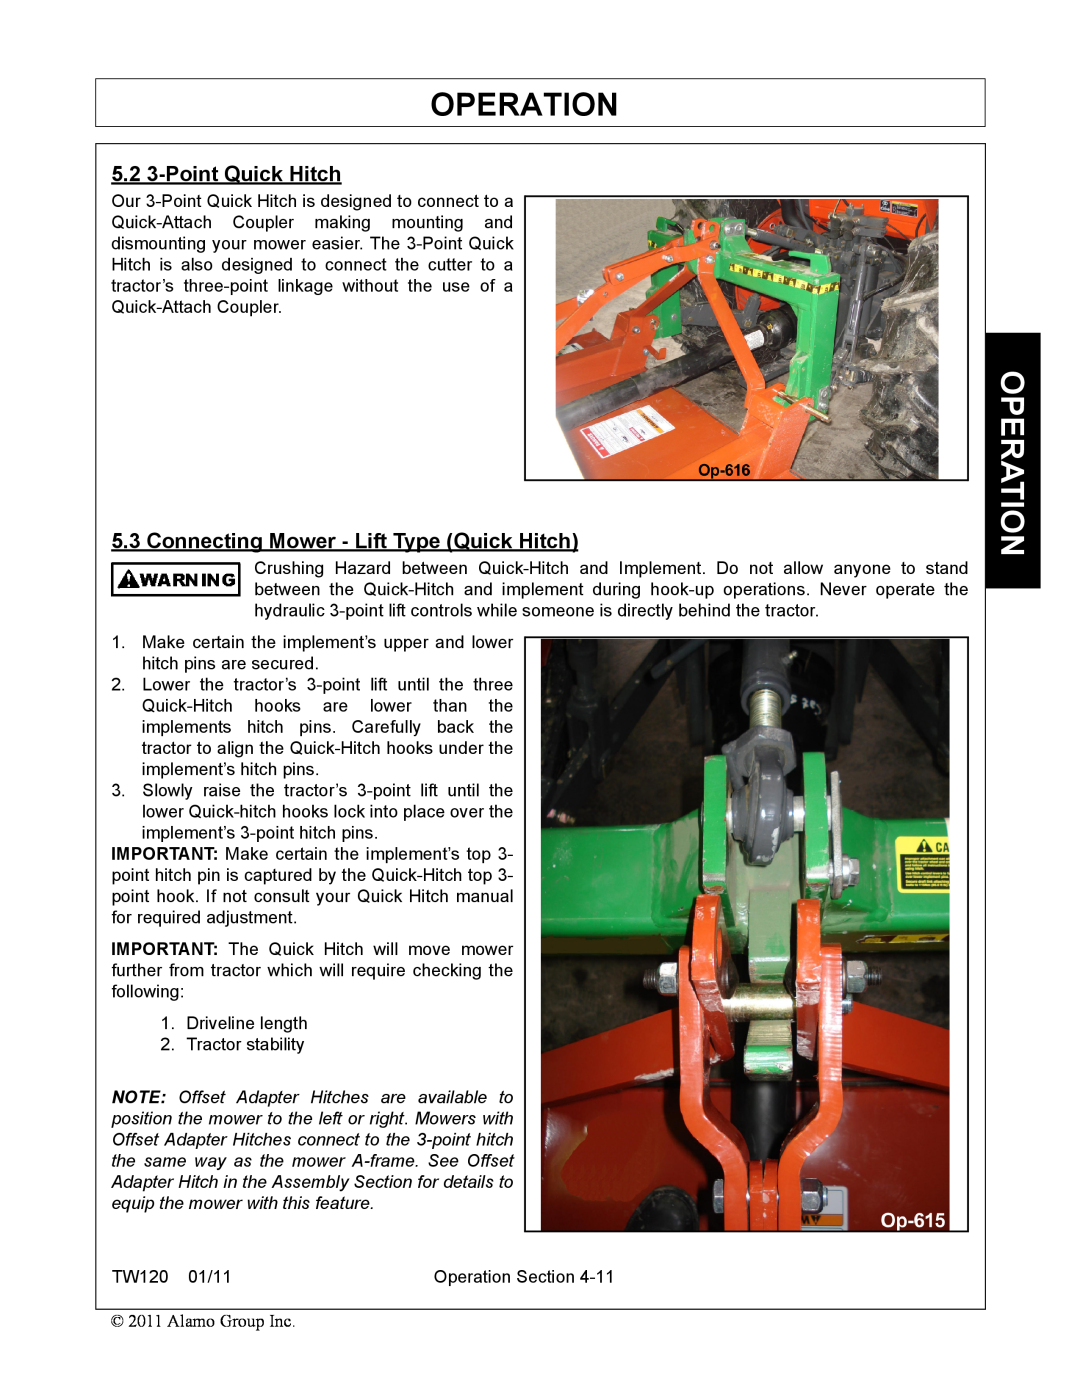 Blue Rhino FC-0025, FC-0024 manual Operation, 5.2 3-PointQuick Hitch, Connecting Mower - Lift Type Quick Hitch 